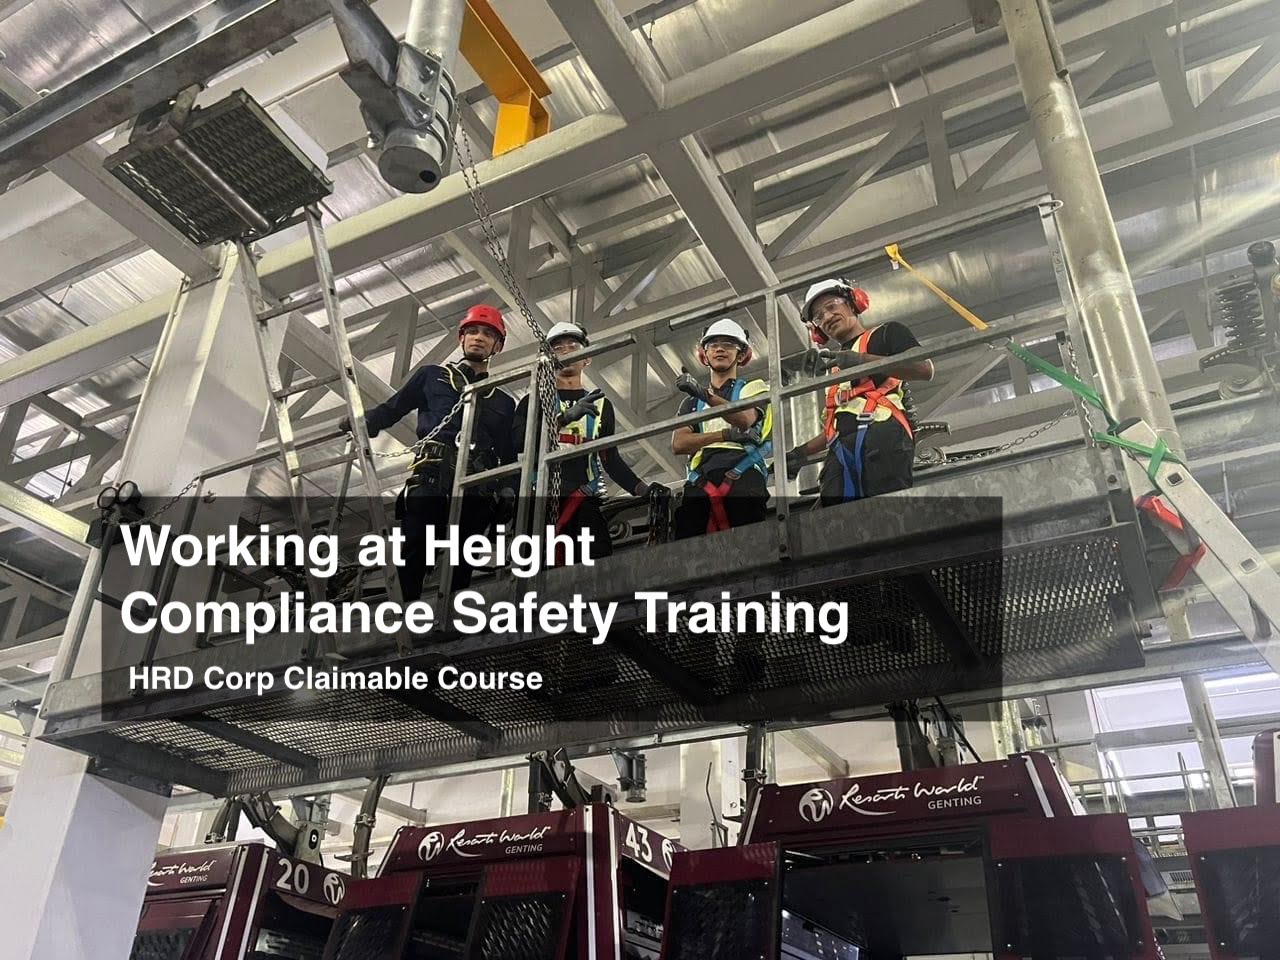 working at height osha safety training with hrd claimable